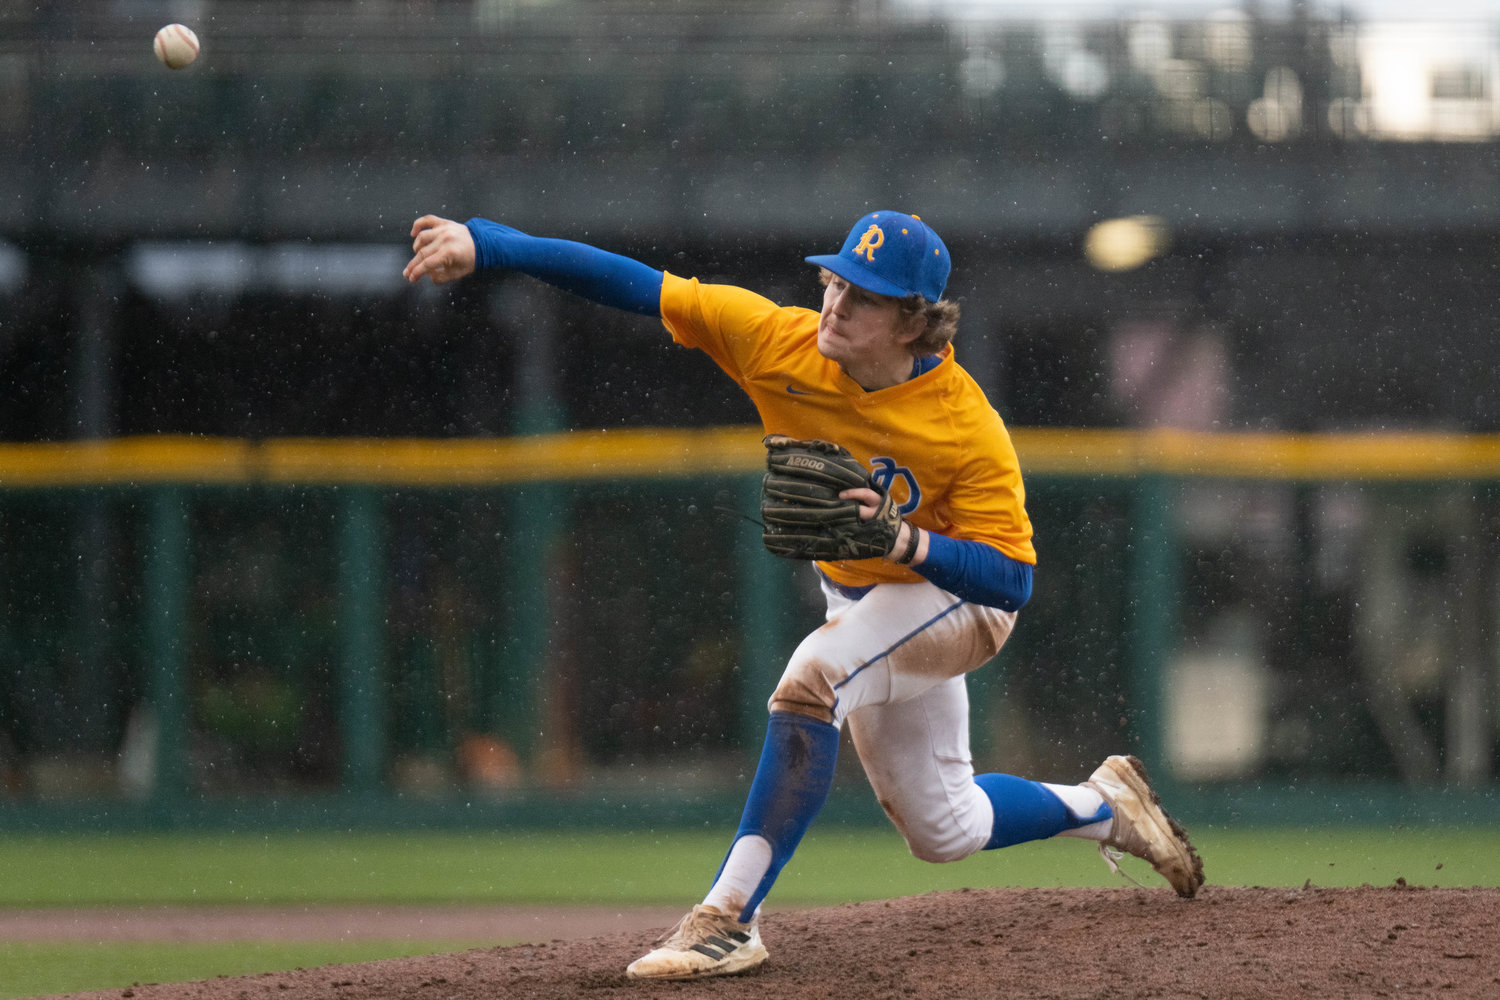 Braden Hartley throws a pitch throw the downpour during Rochester's 11-7 win over Tenino on April 1 at Cheney Stadium in Tacoma.